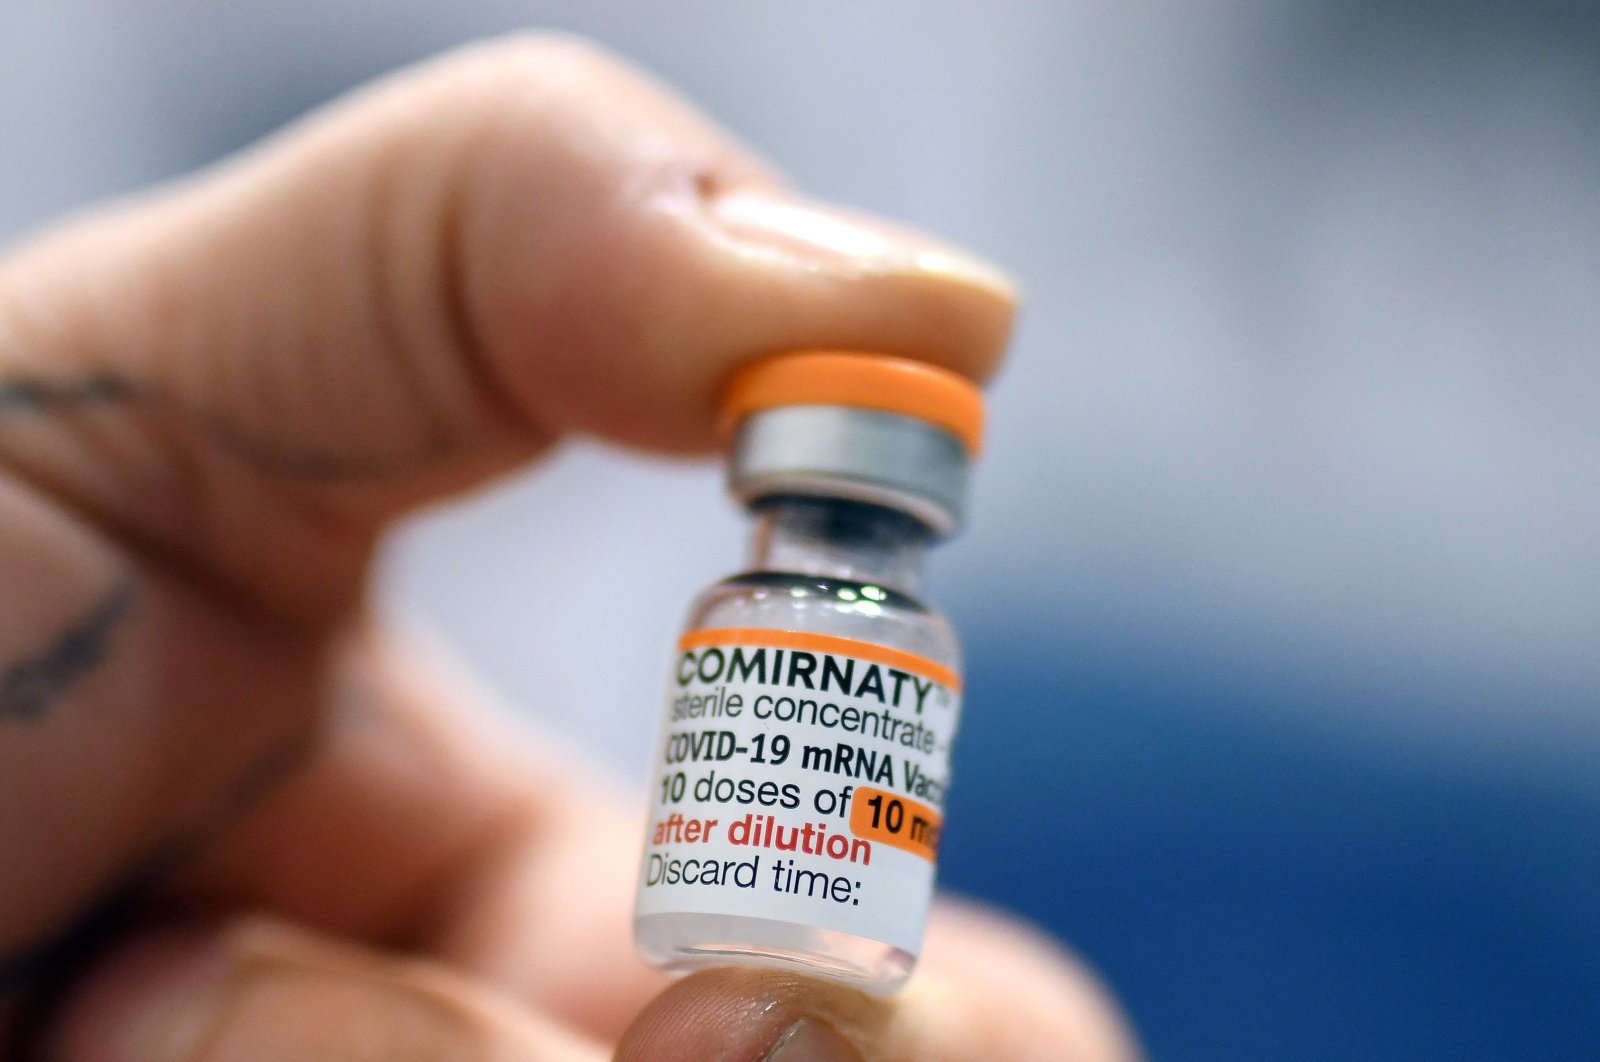 A vial of the Biontech-Pfizer vaccine Comirnaty in the pediatric dosage is seen at a children vaccination center in Dortmund, western Germany, Dec. 16, 2021. (AFP Photo)